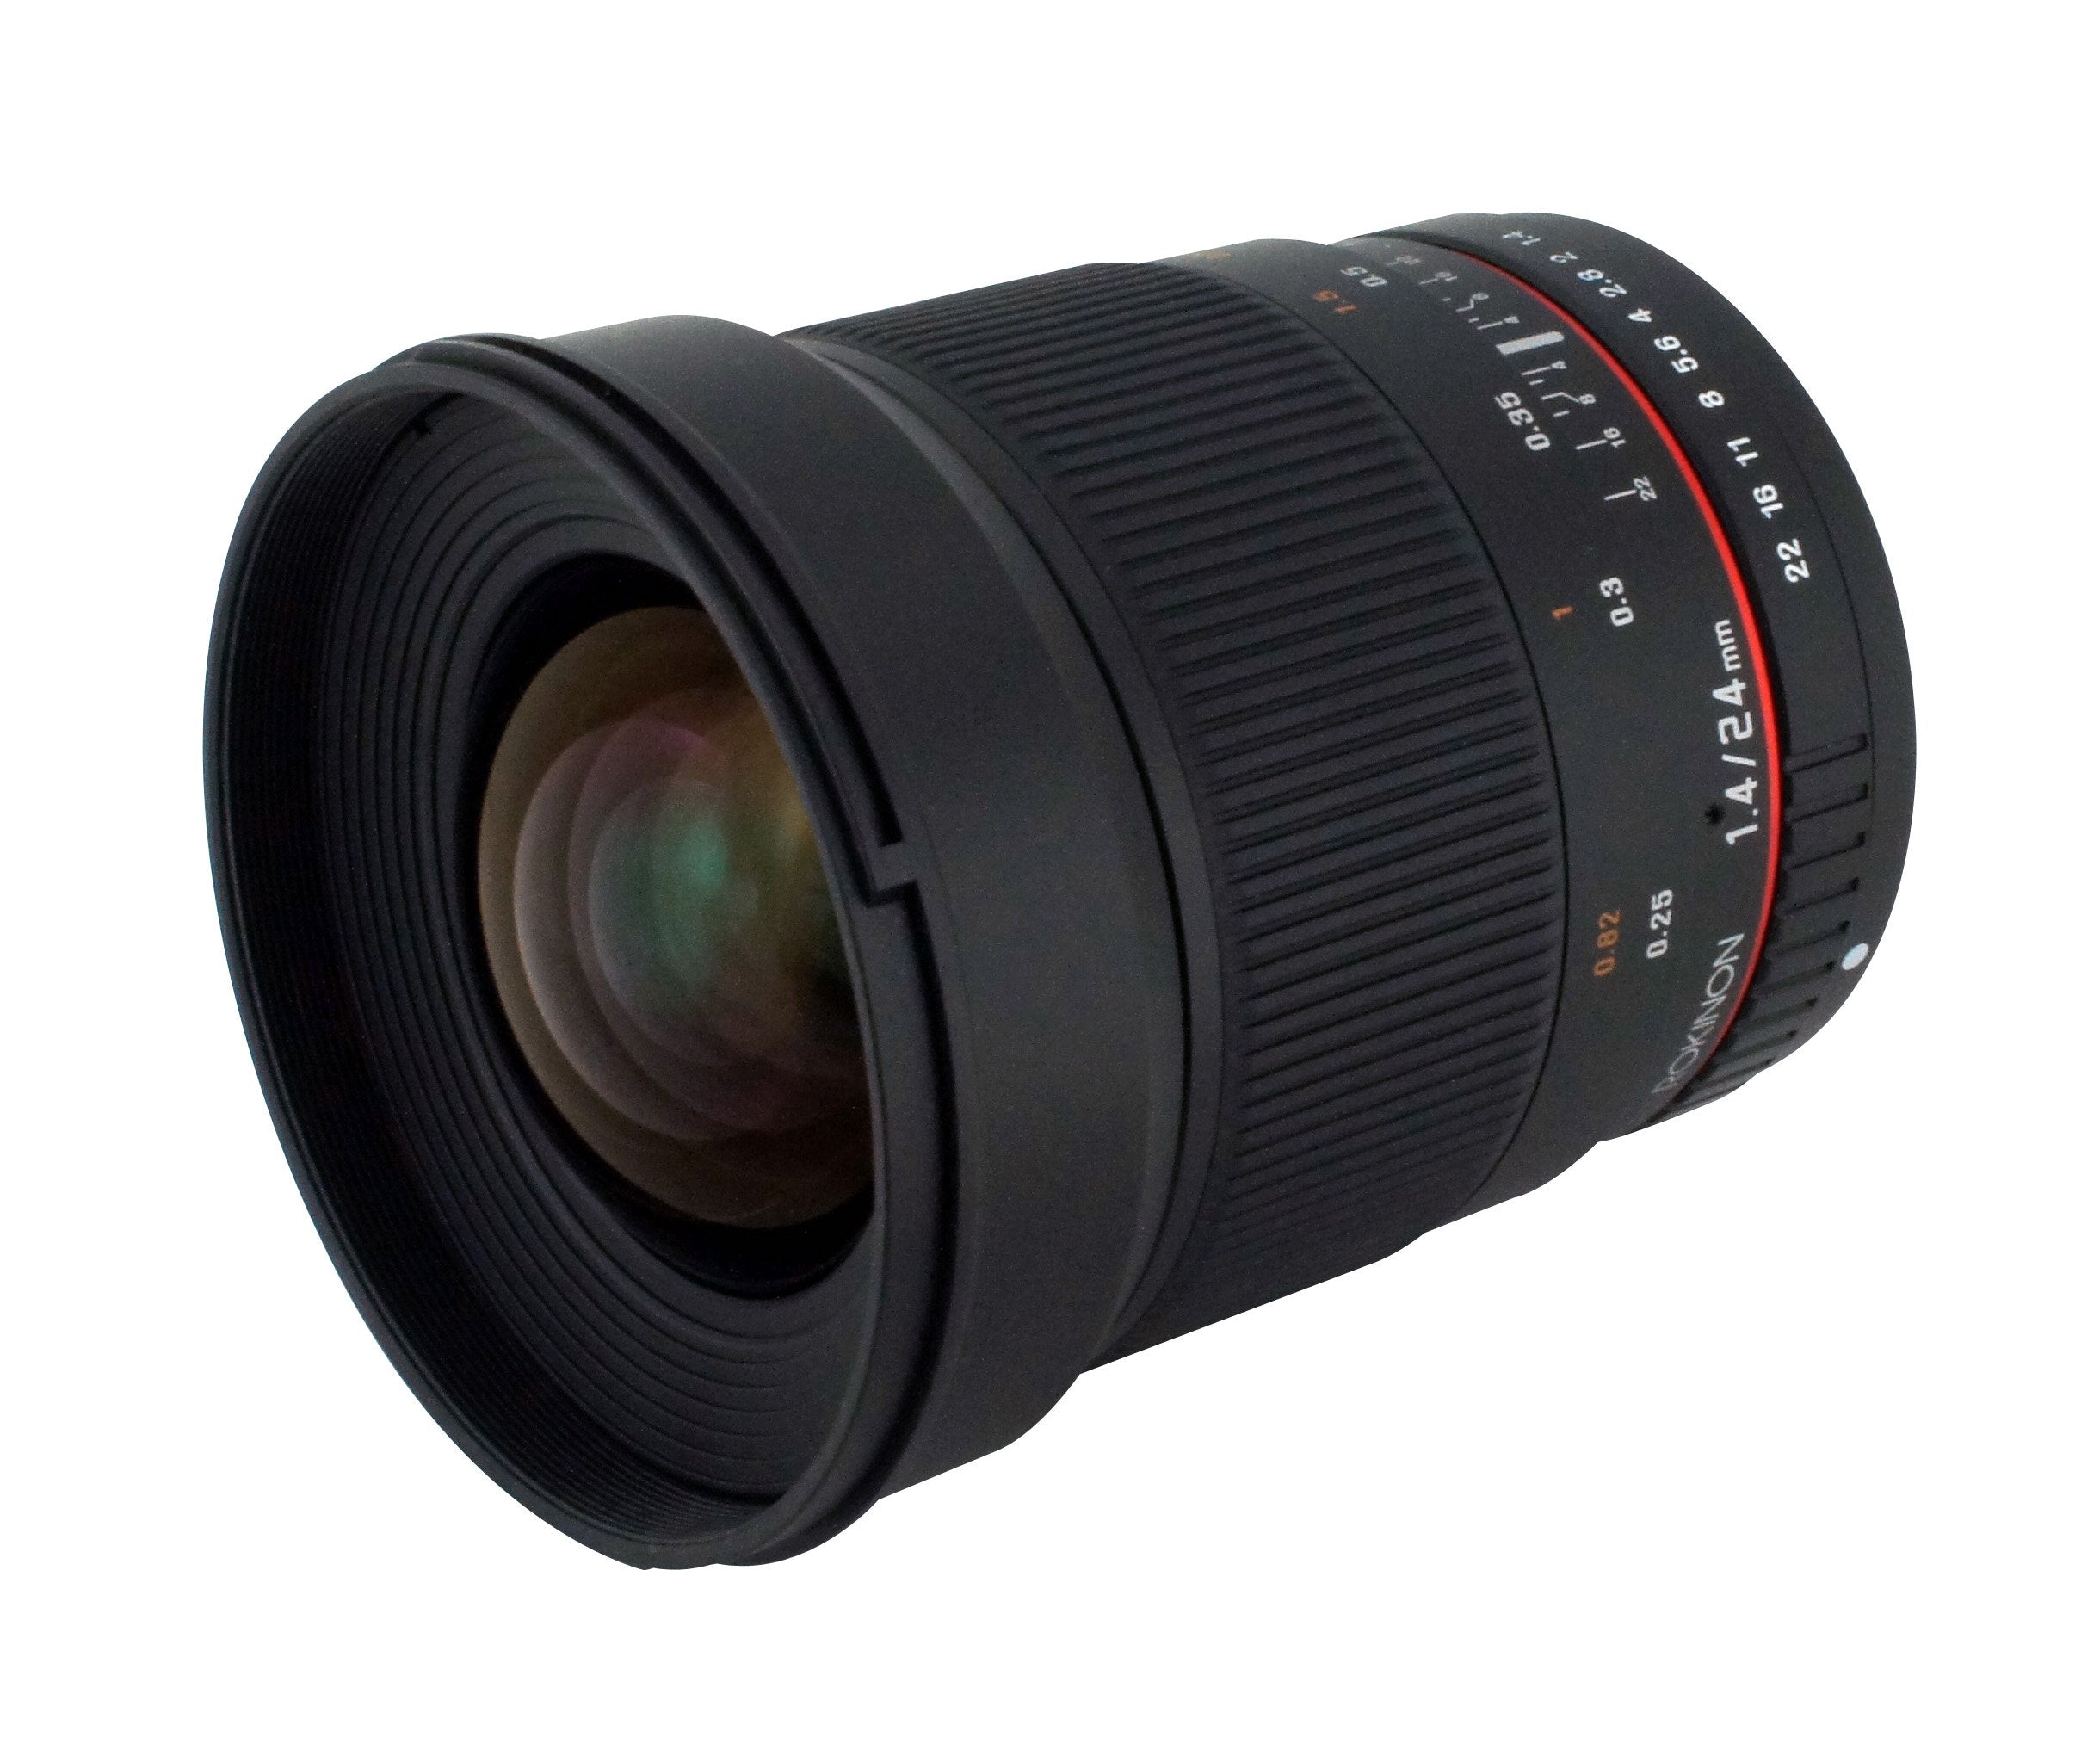 Rokinon 24mm F/1.4 Aspherical Wide Angle Lens for Olympus 4/3 RK24M-O